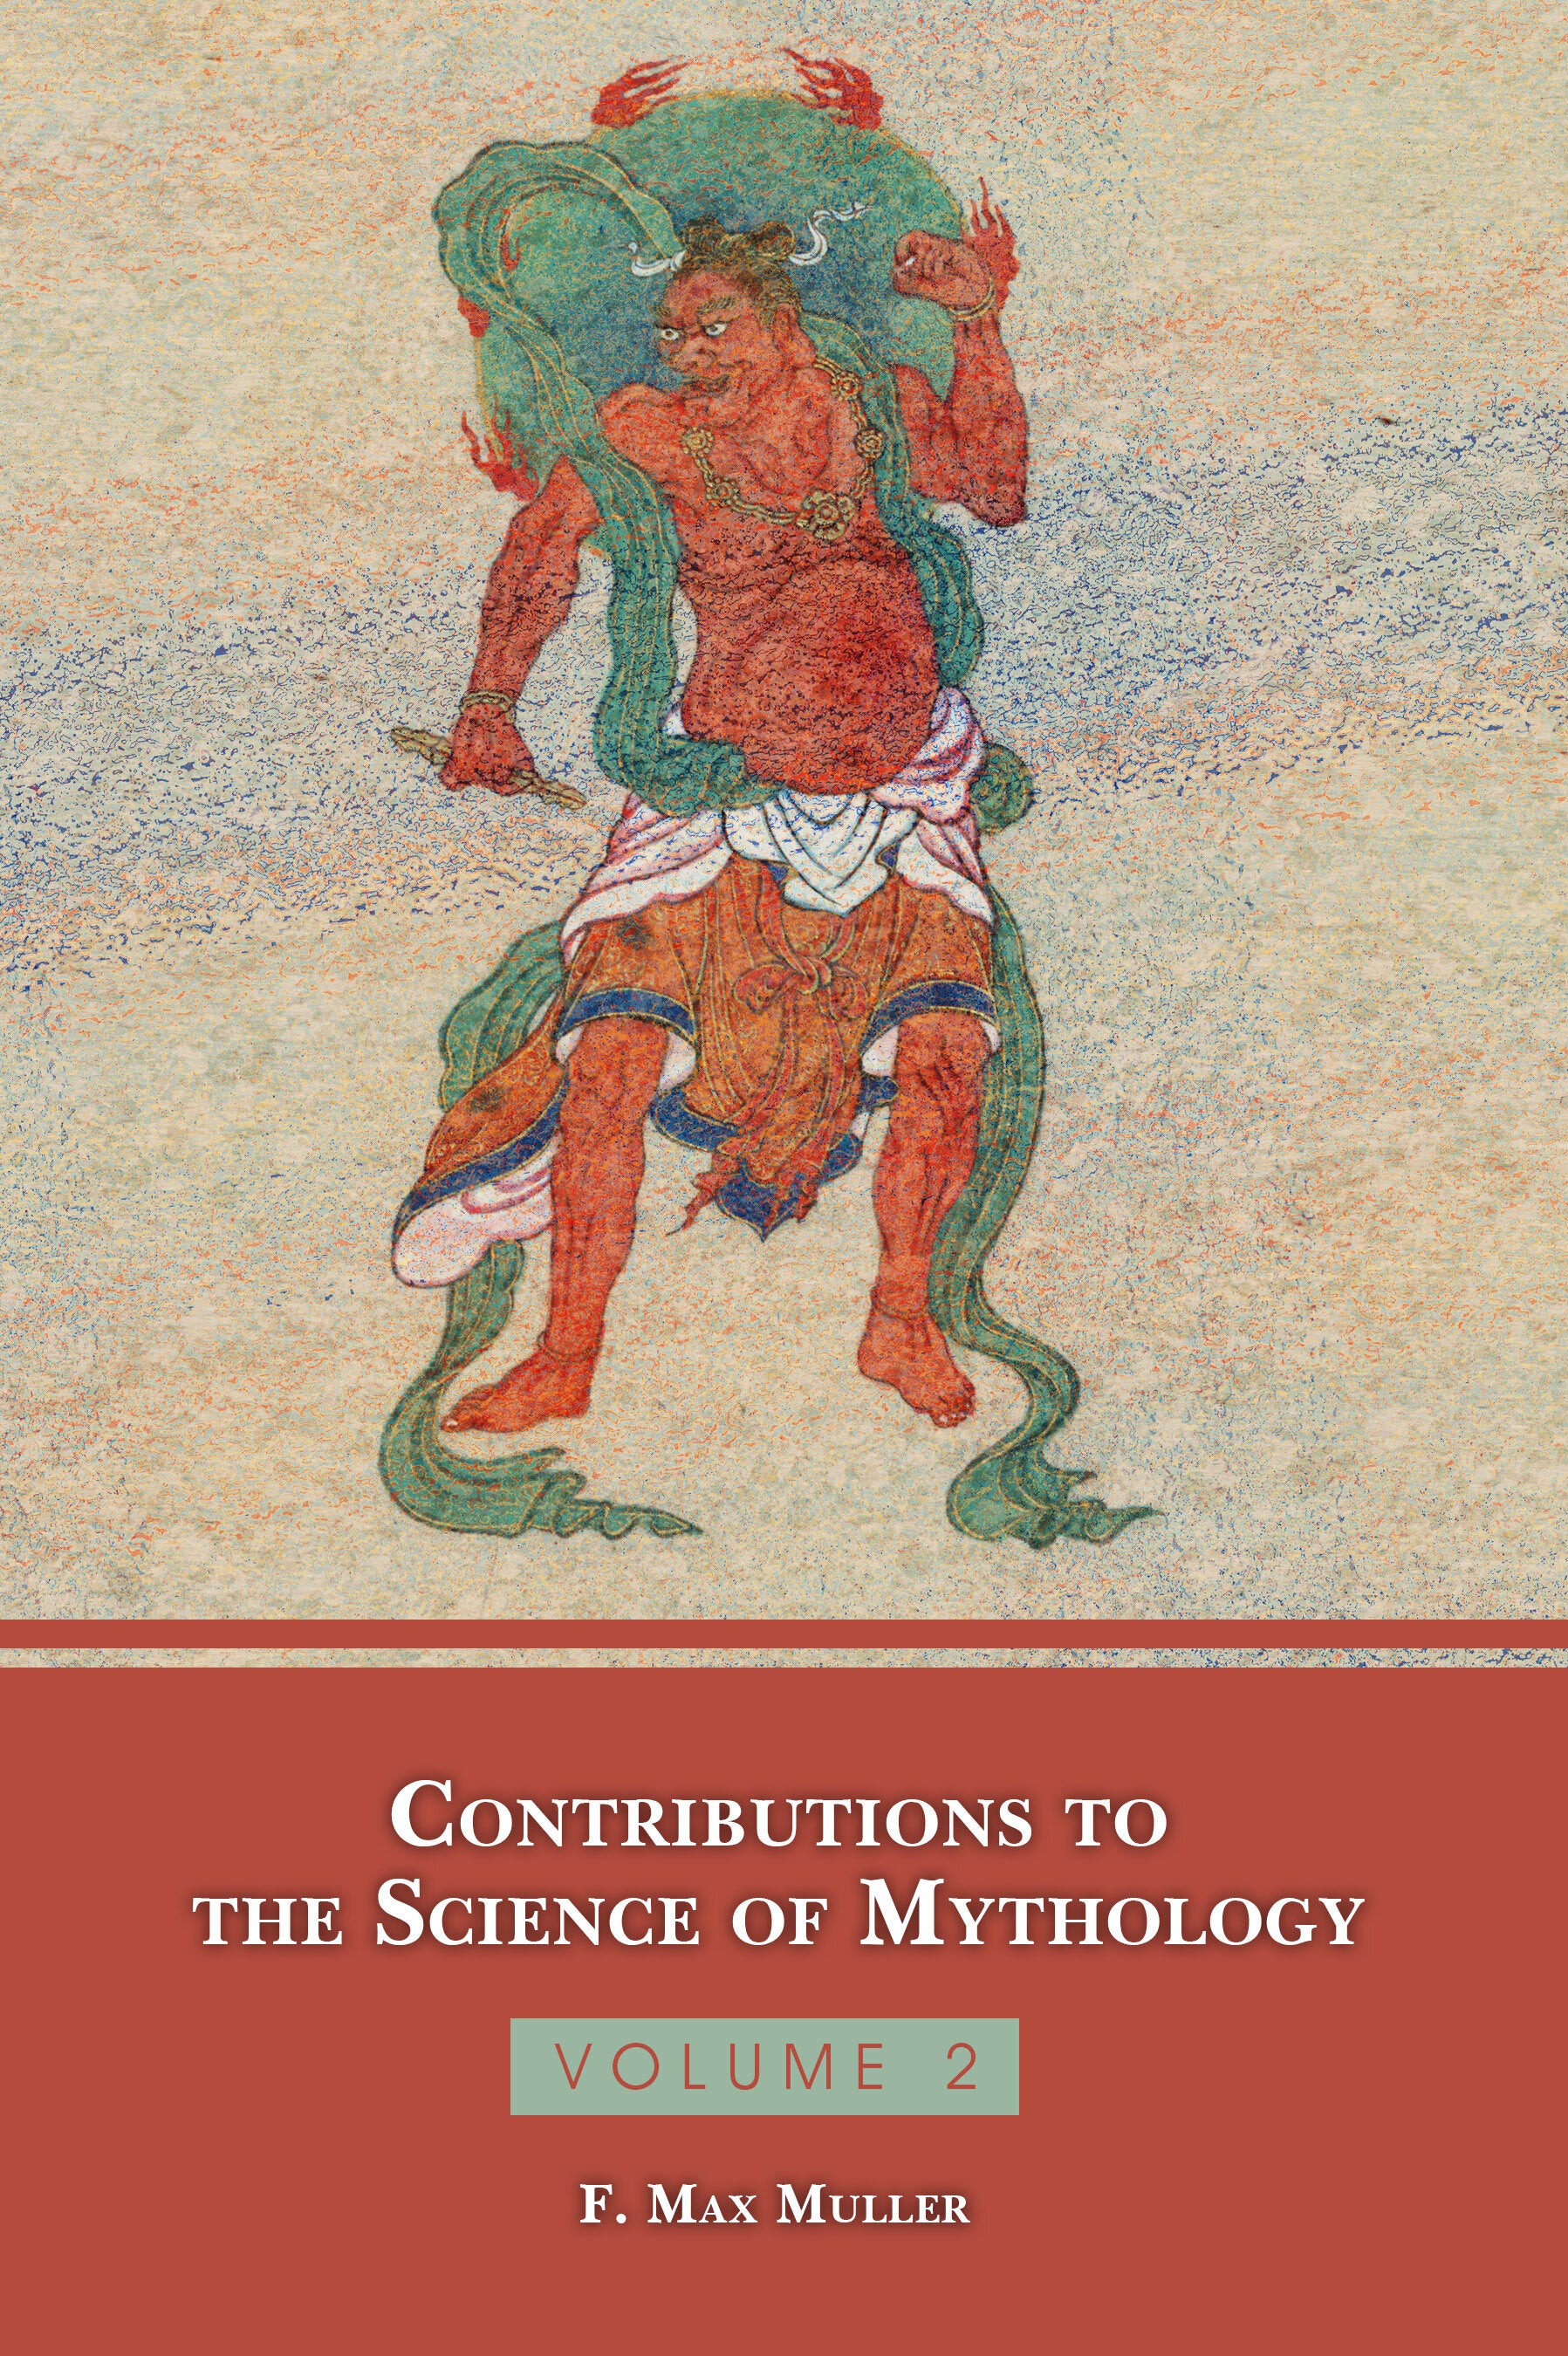 Contributions to the Science of Mythology Volume 2